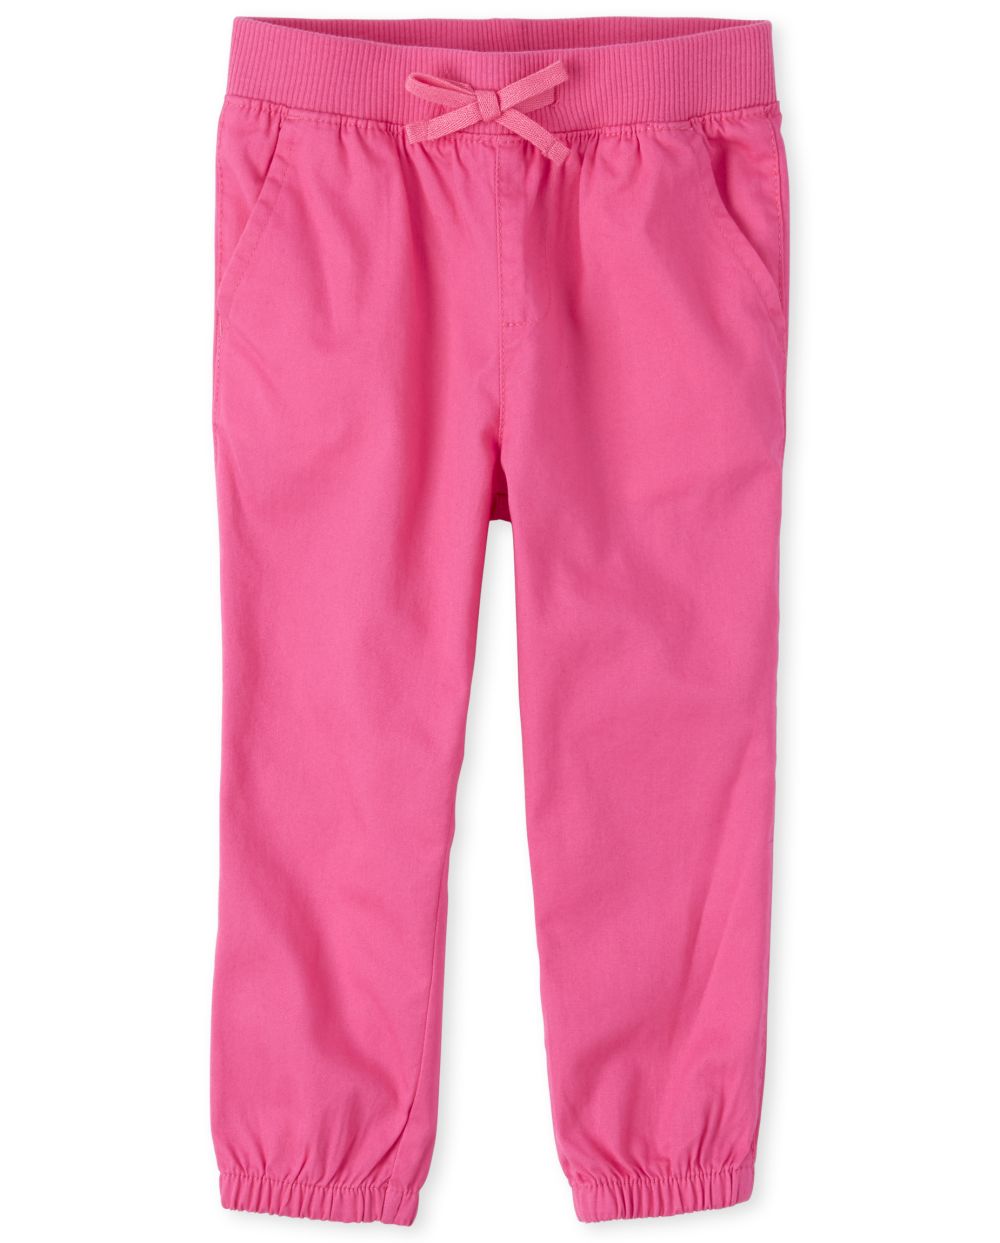 Baby And Toddler Girls Woven Matching Pull On Beach Pants